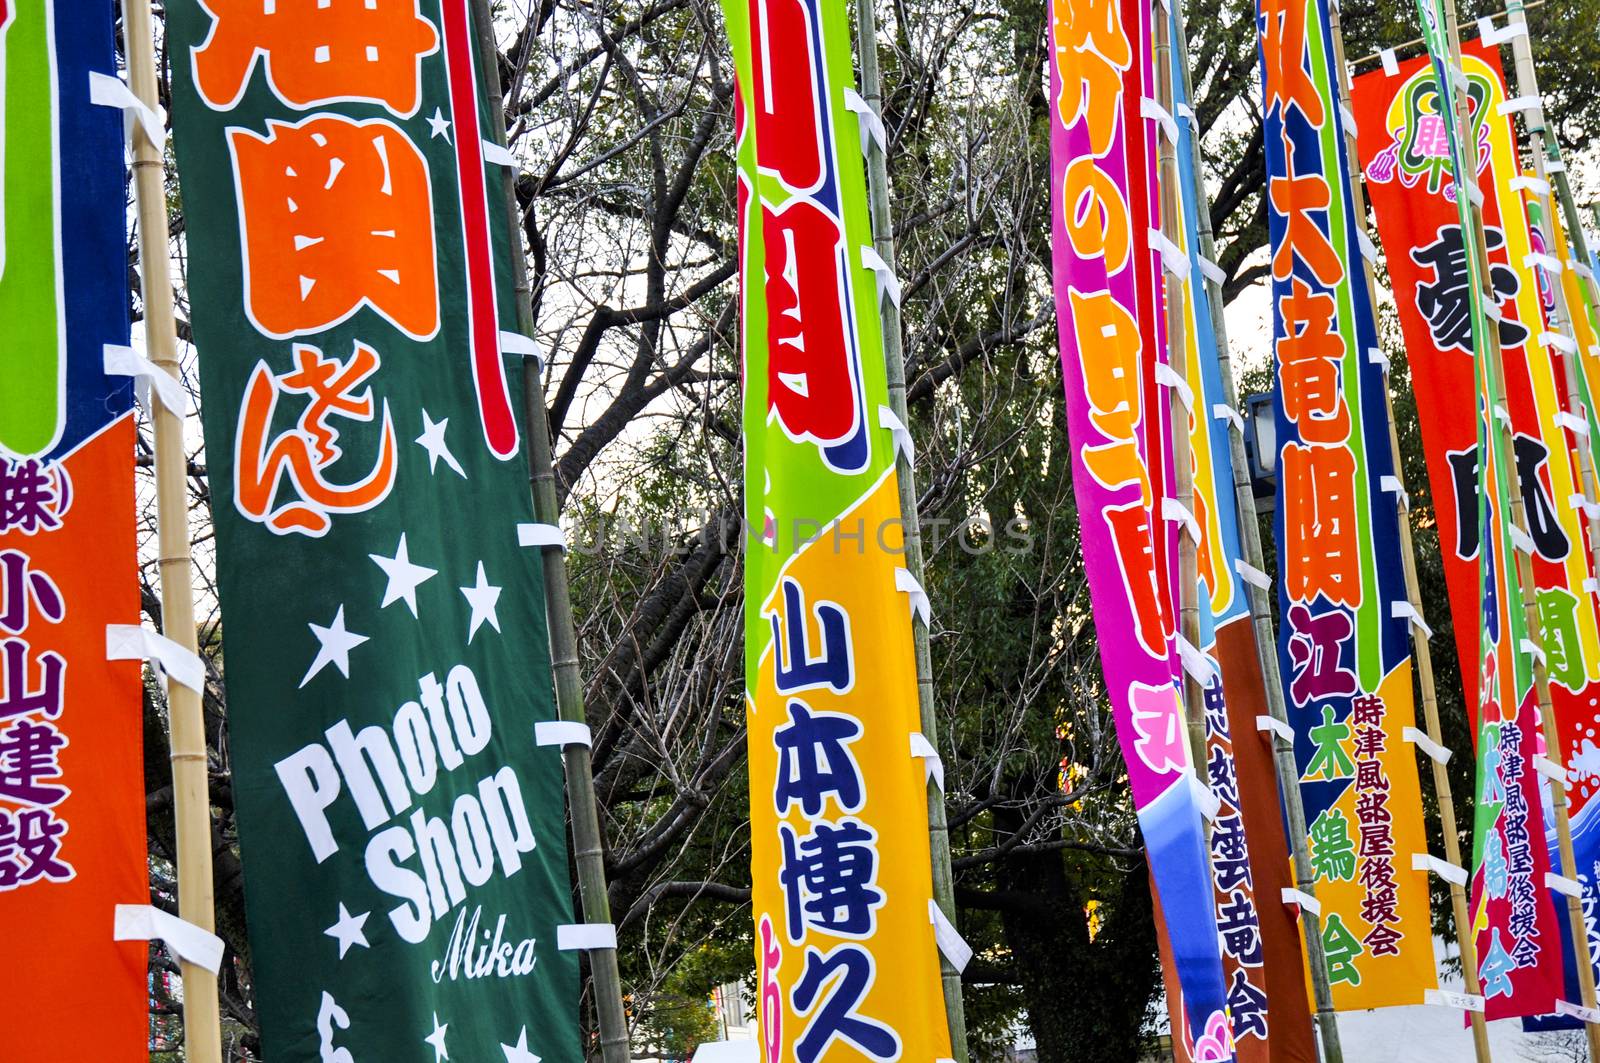 Sumo flags in Tokyo, Japan by MichaelMou85